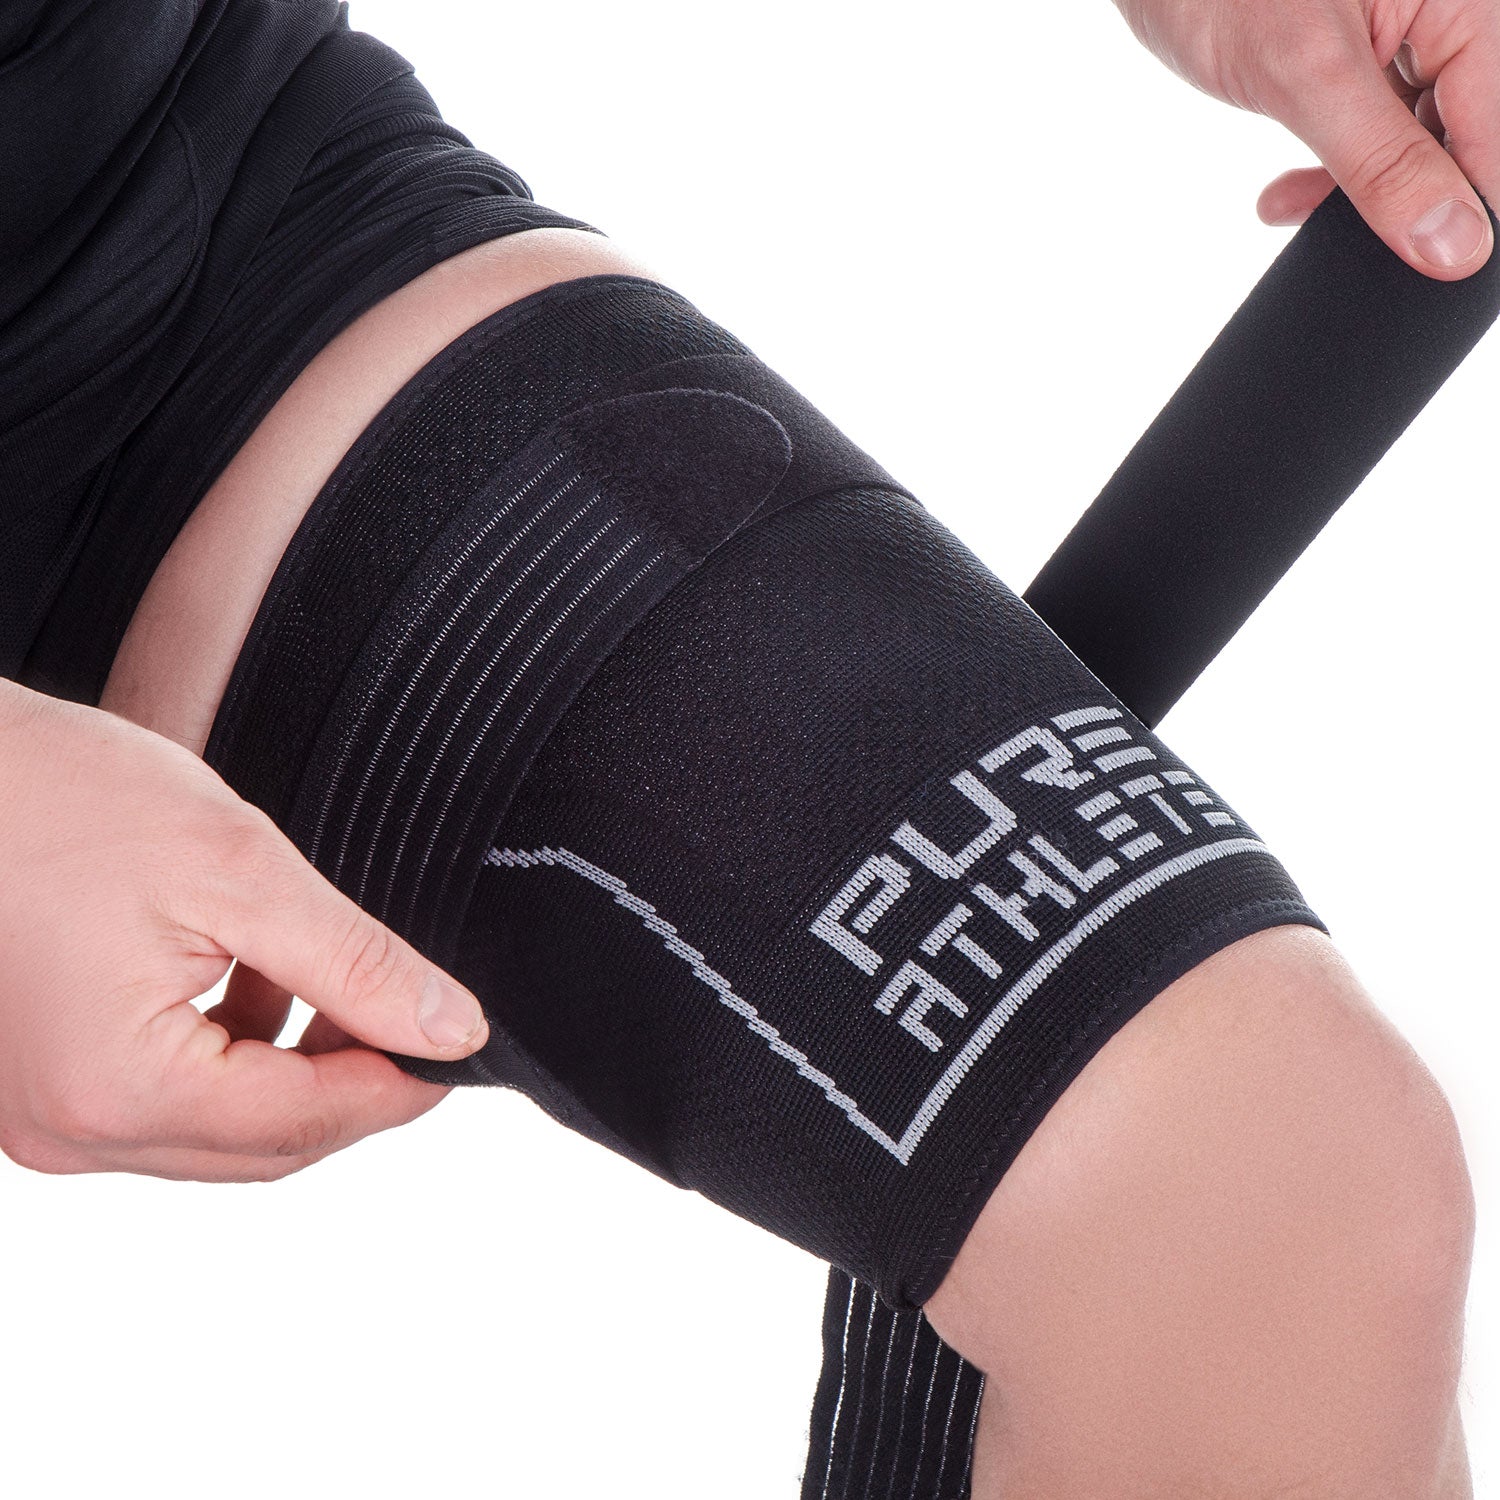 Thigh Compression Sleeve with Adjustable Strap - Hamstring, Quadriceps,  Groin Pull - Pure Athlete